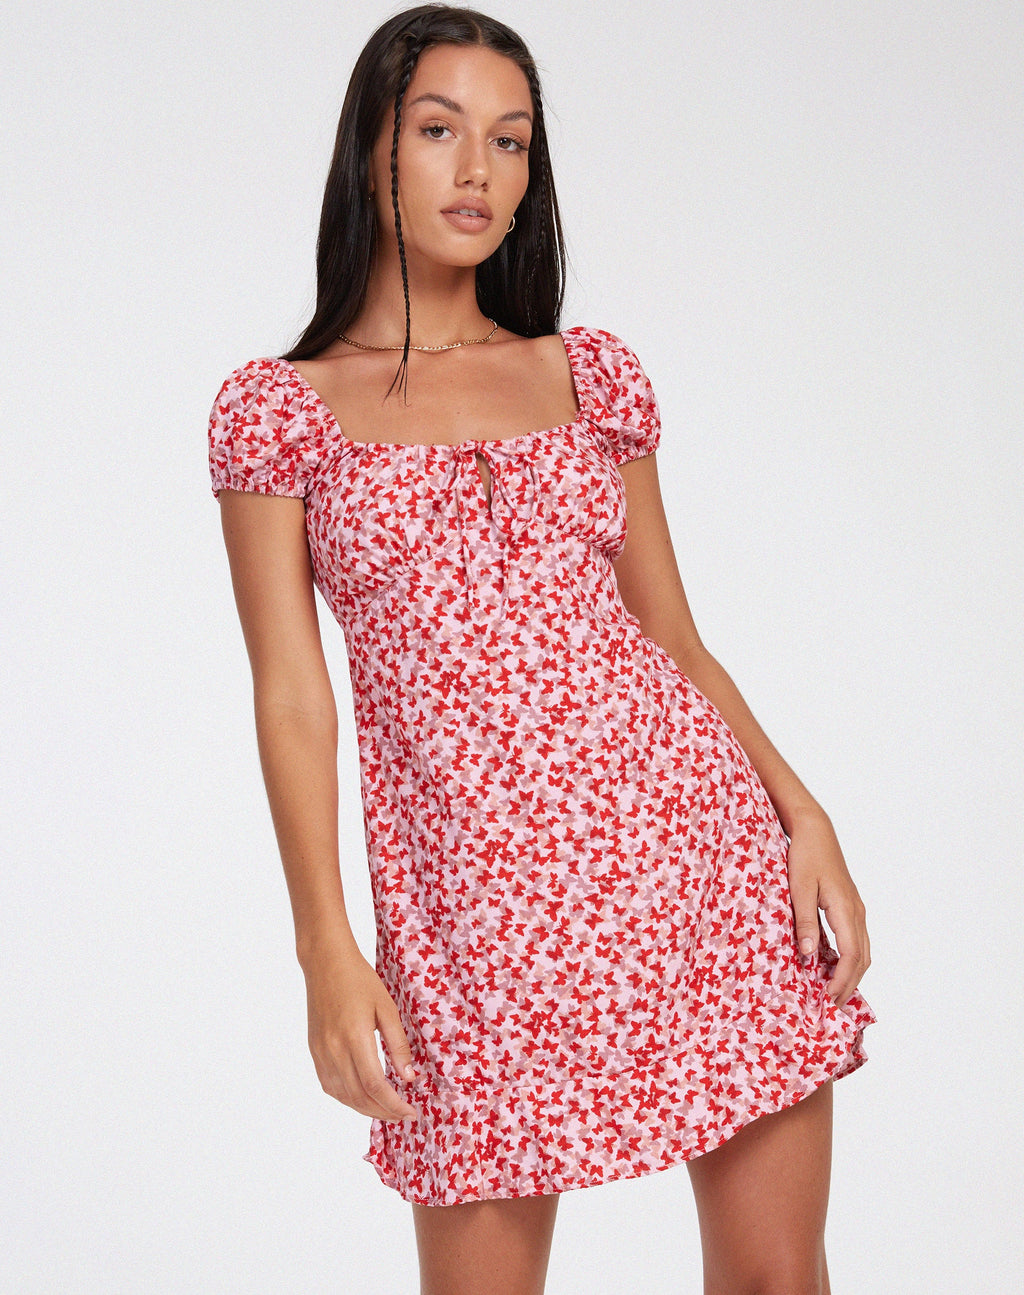 Galaca Mini Dress in Ditsy Butterfly Peach and Red